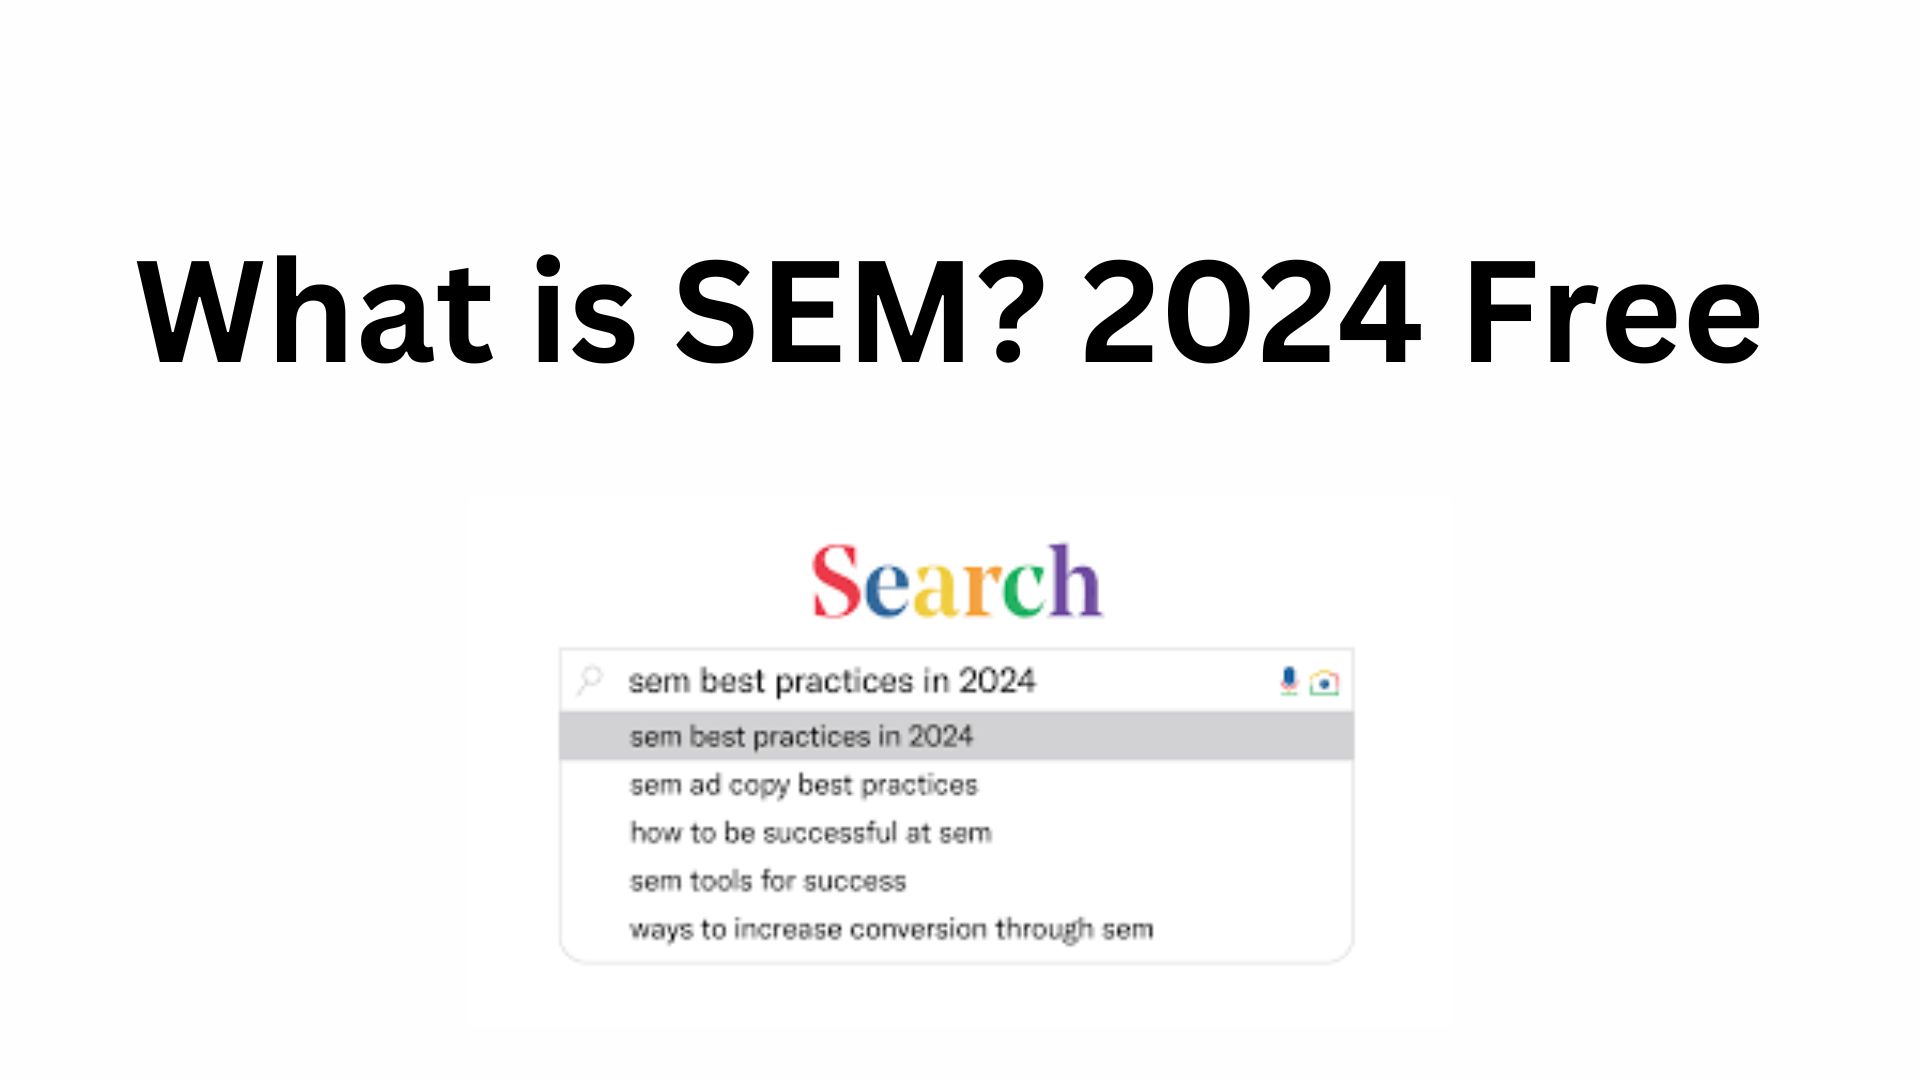 What Is Sem? 2024 Free